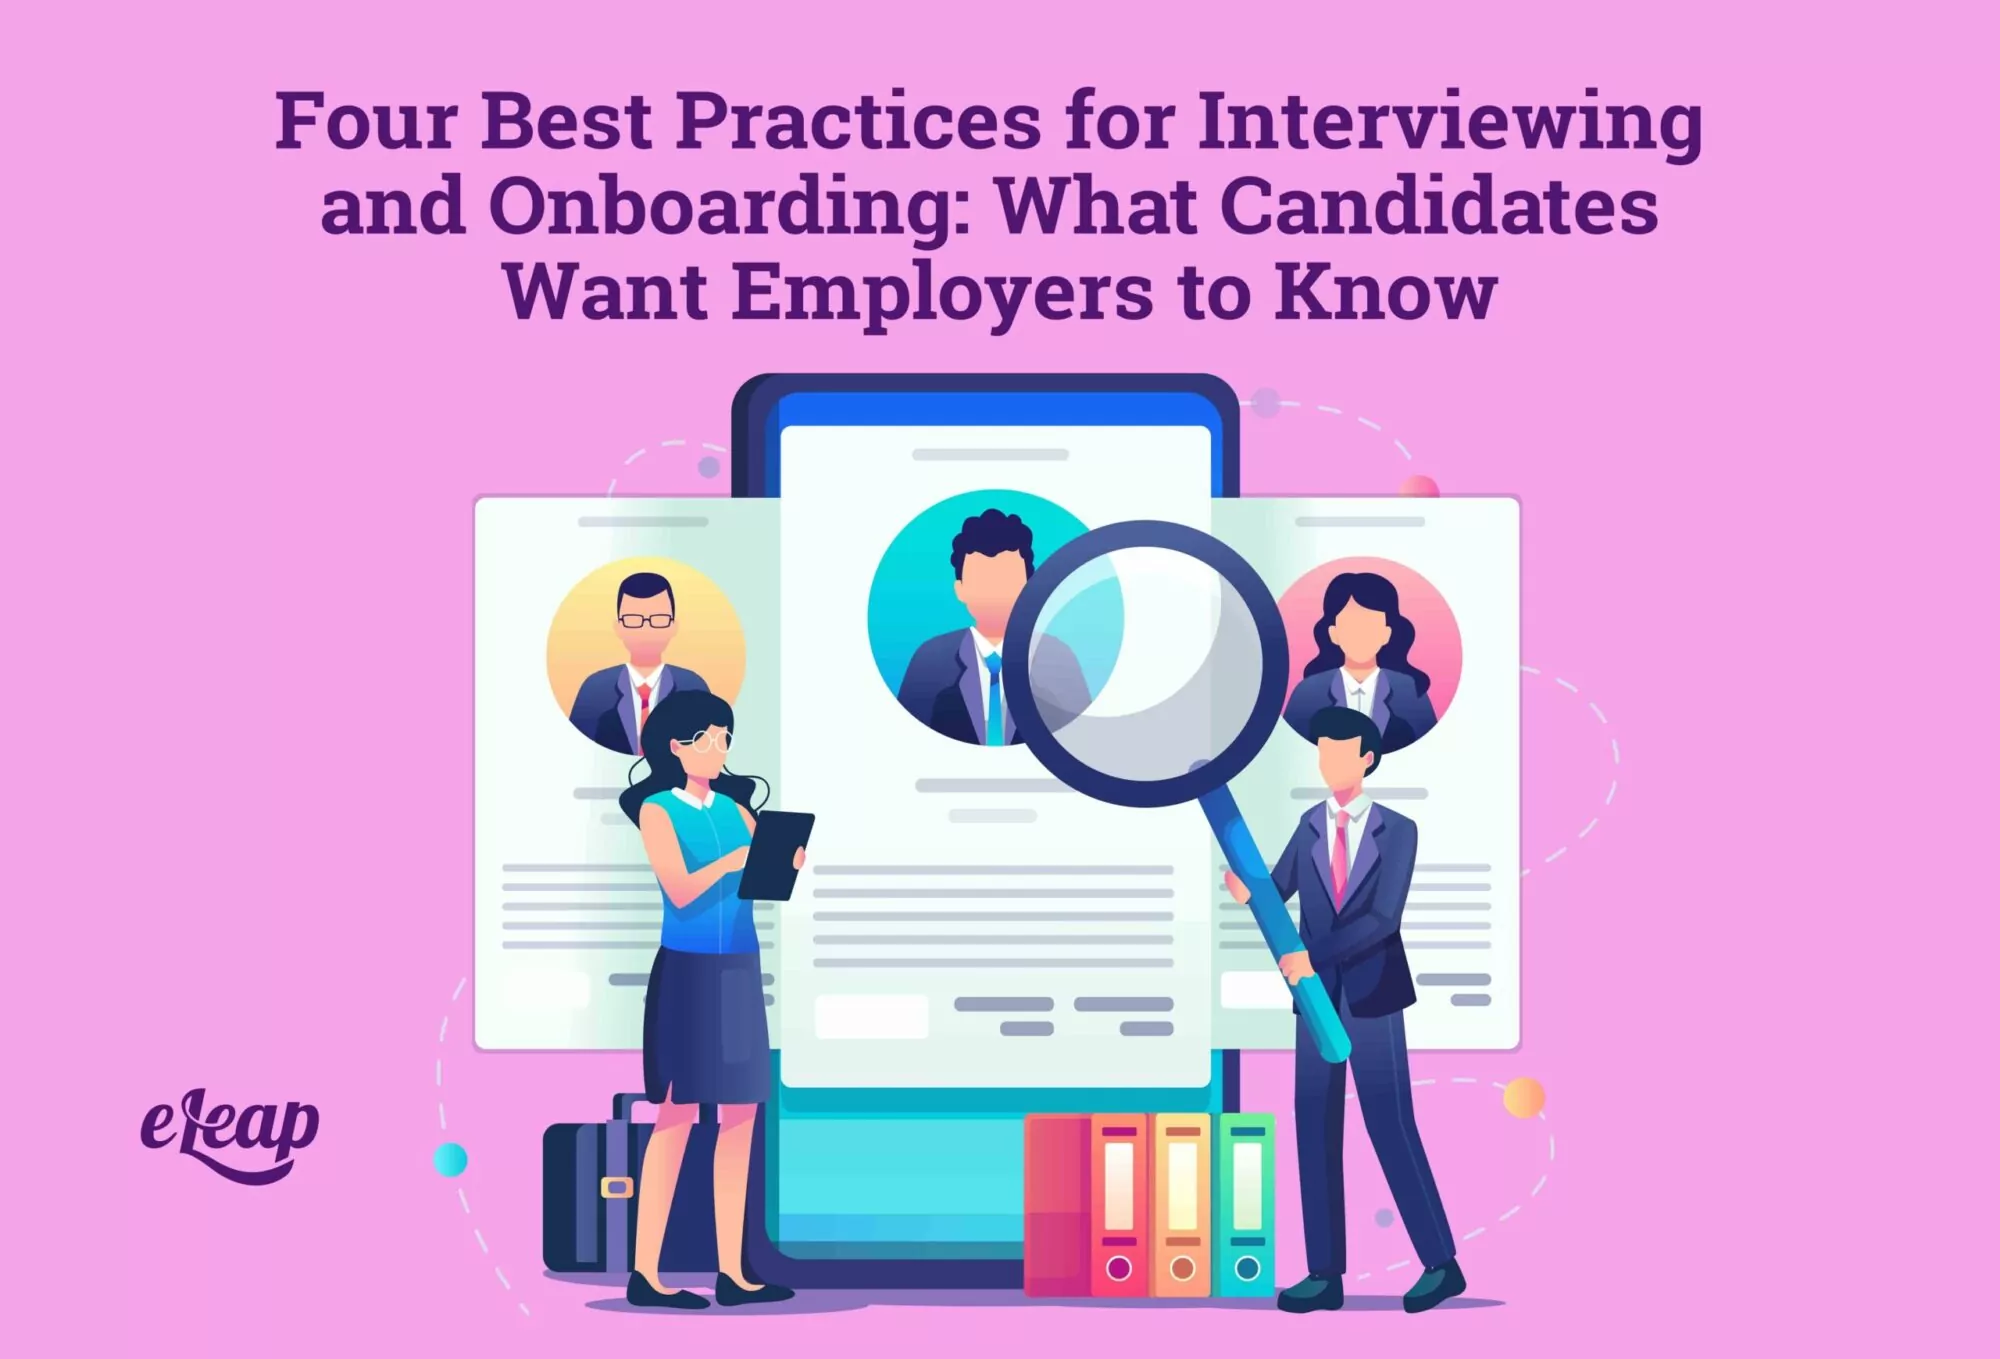 Four Best Practices for Interviewing and Onboarding: What Candidates Want Employers to Know